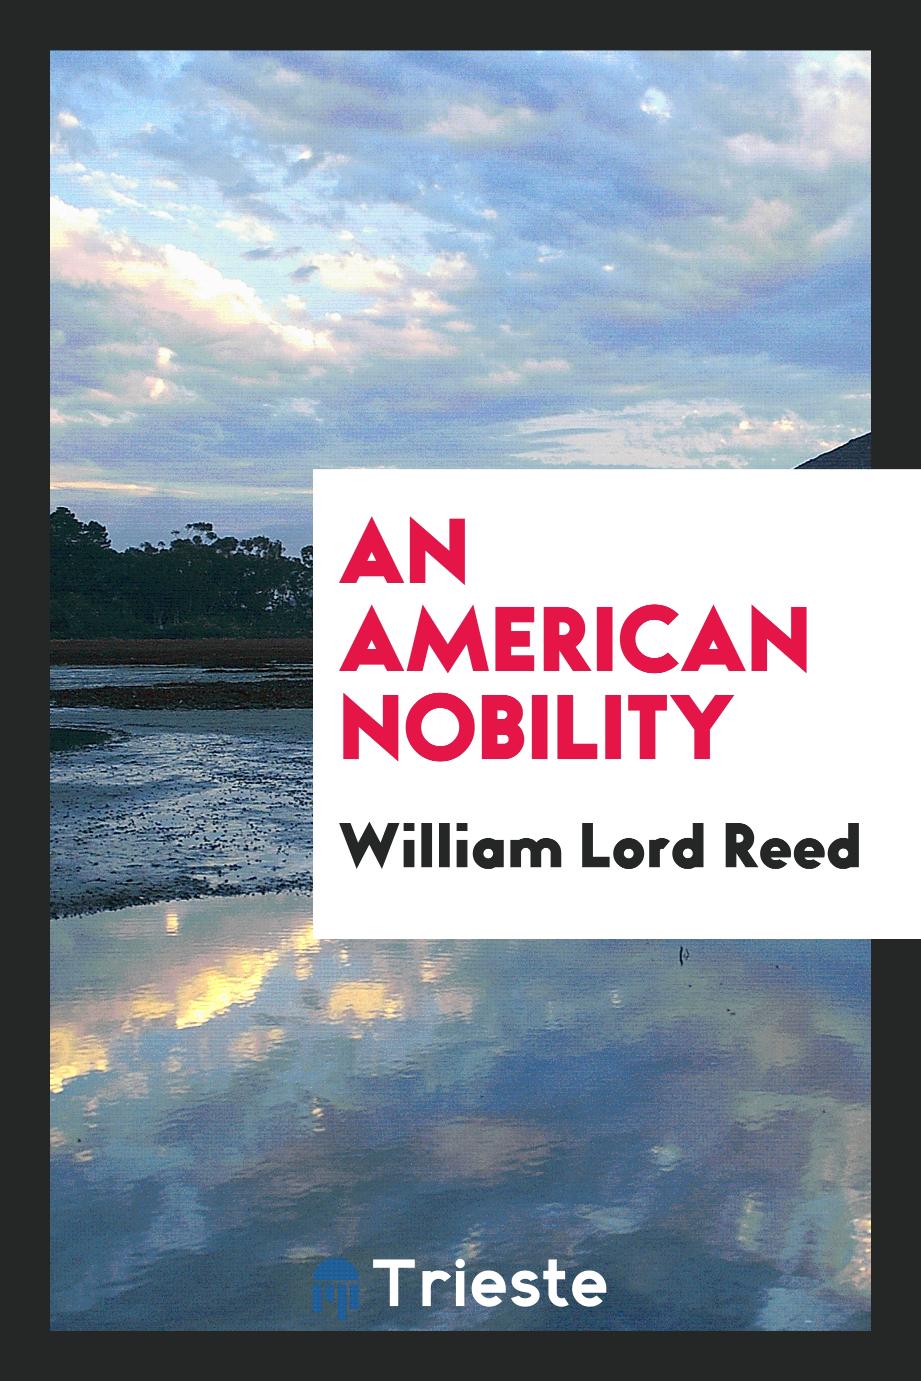 An American Nobility